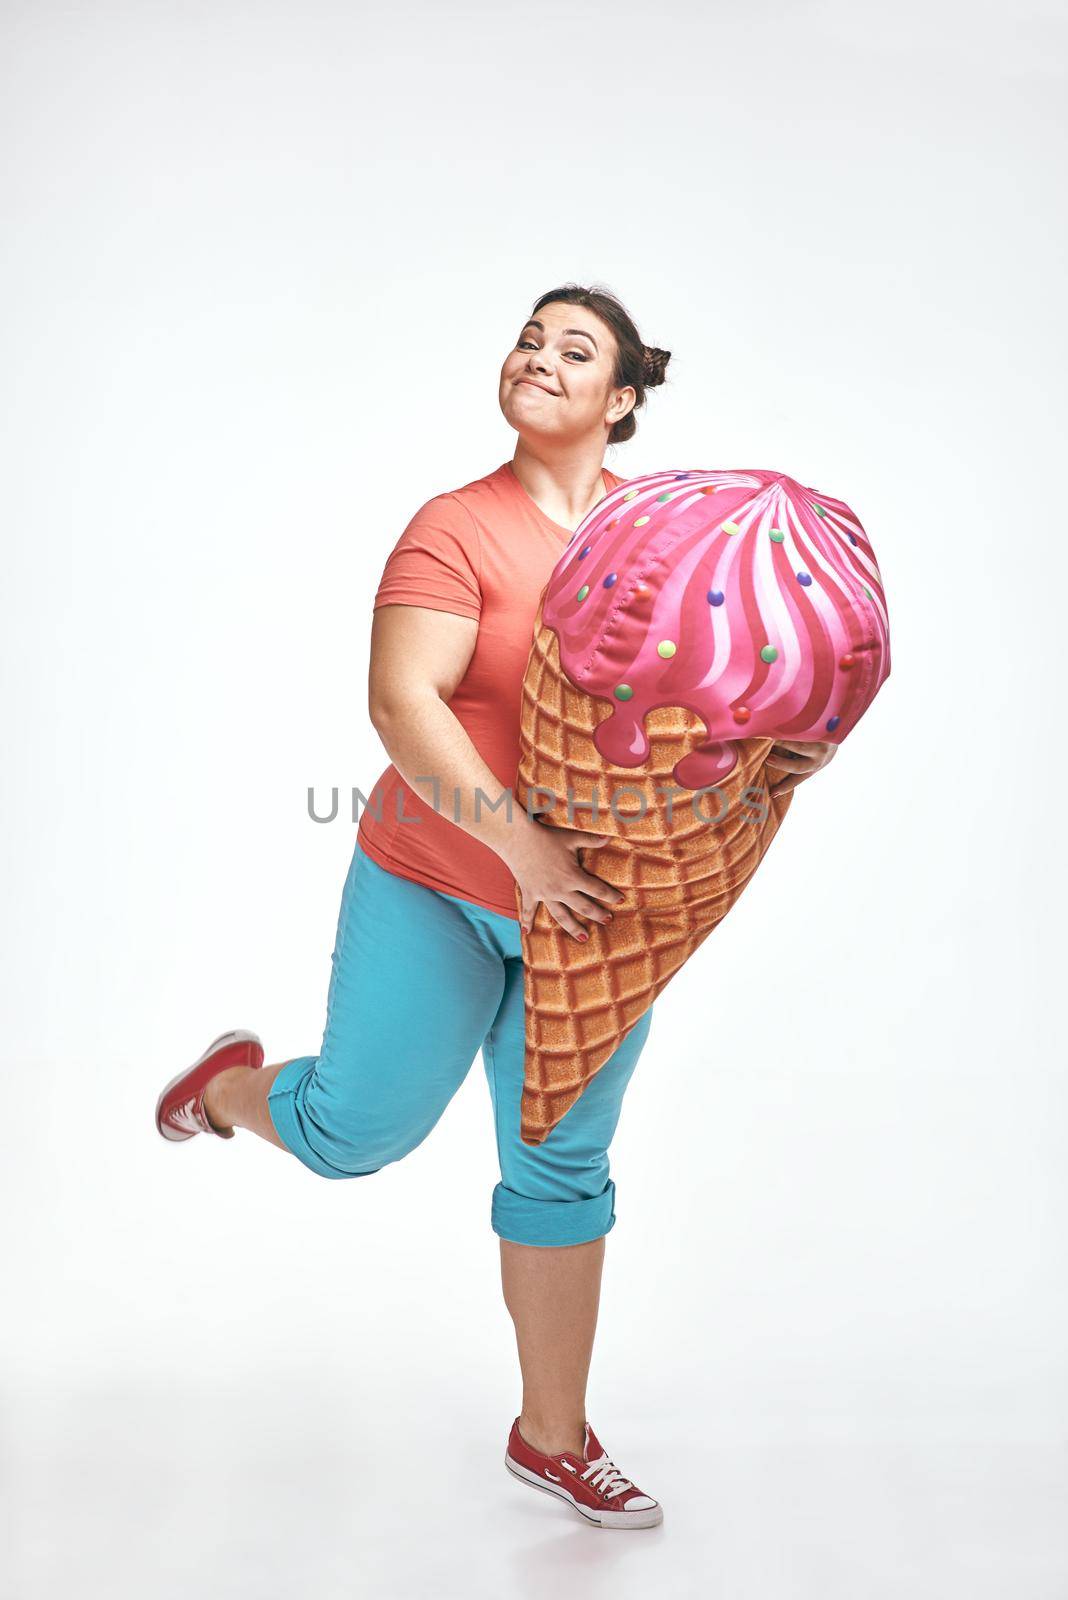 Brunette, chubby woman is holding a huge ice cream by friendsstock